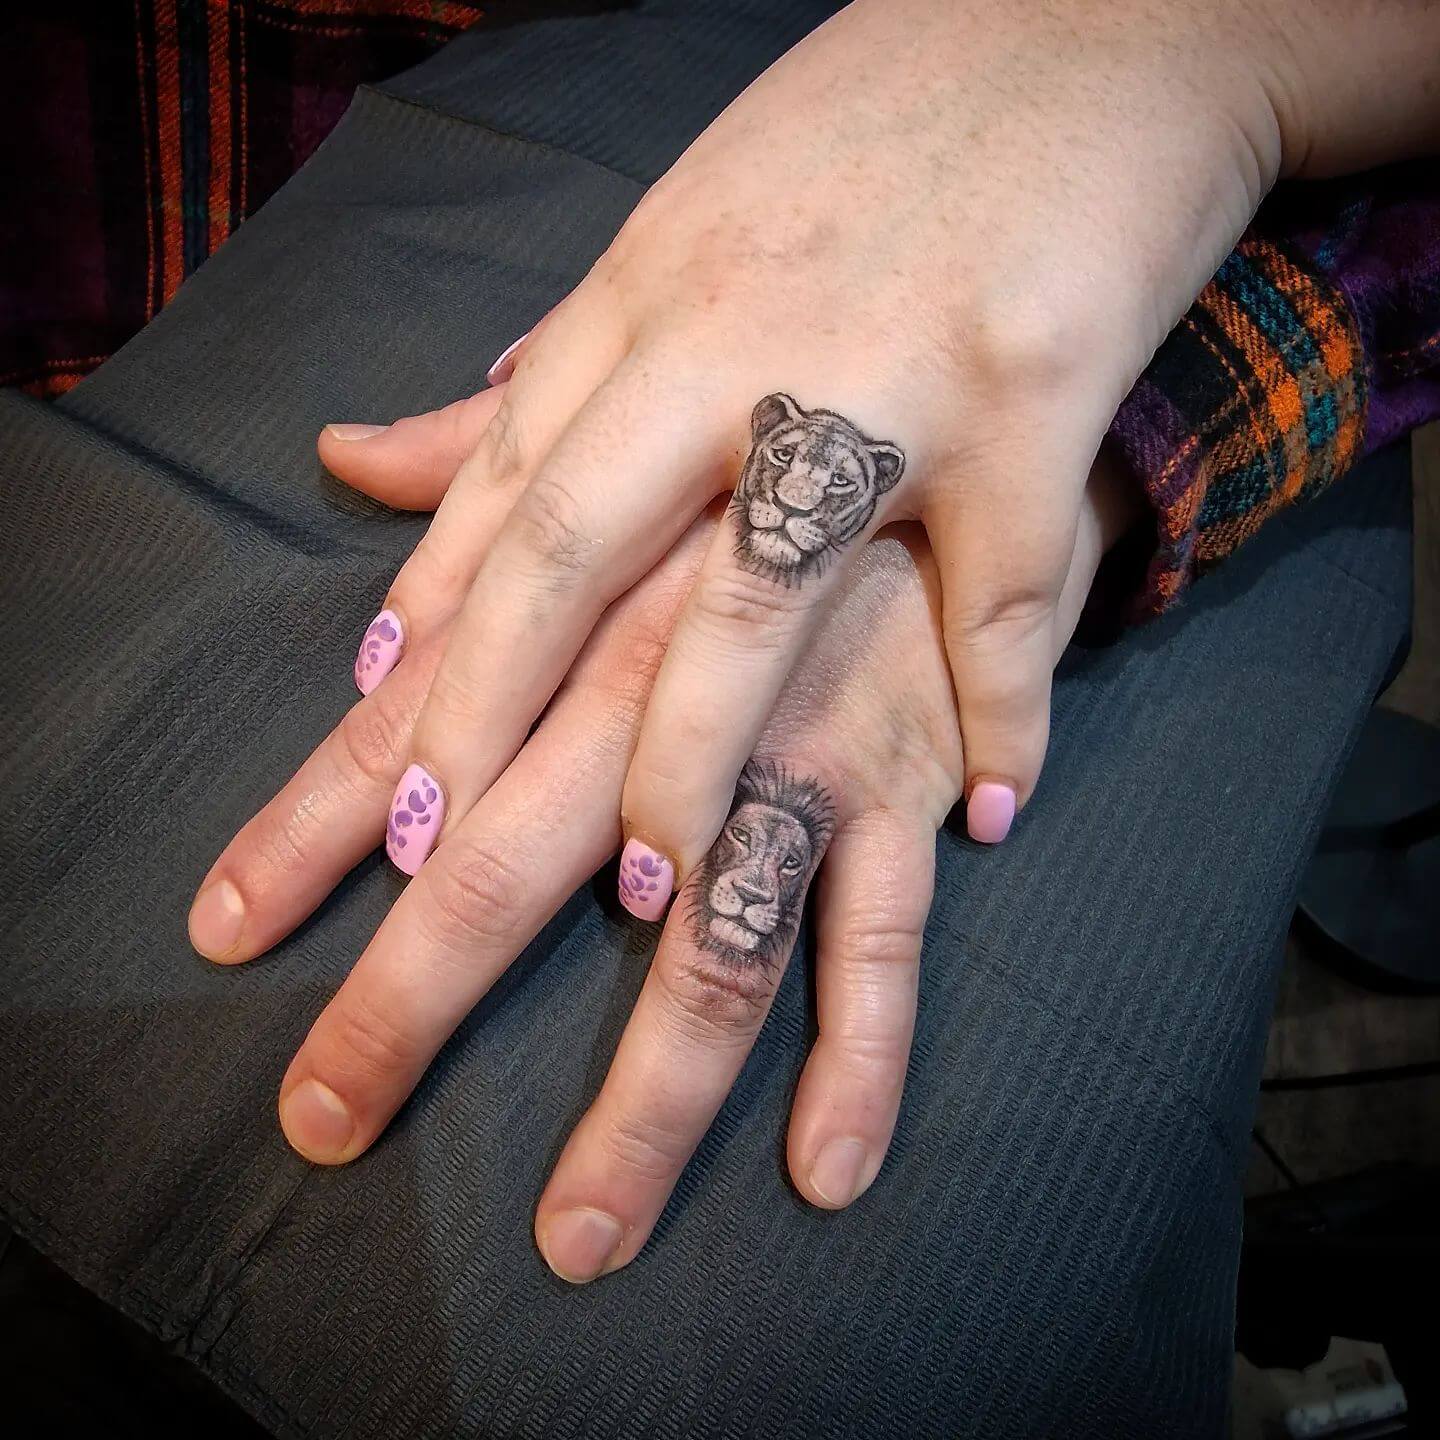 20+ Tiny Finger Tattoos That Delicately Express Your Sense of Style